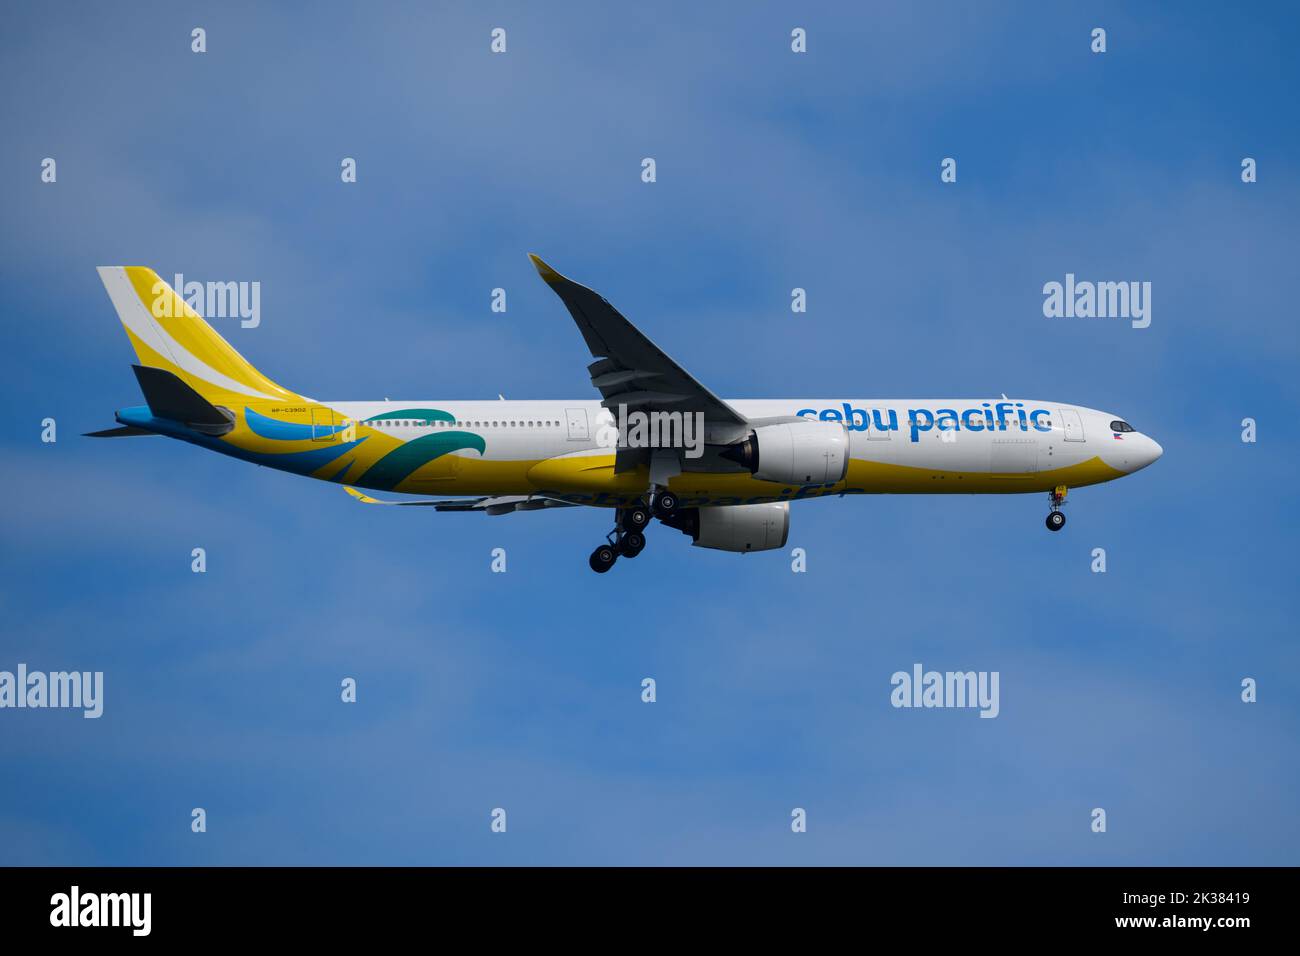 Cebu Pacific Airlines Airbus A330 Arriving at Sydney Airport Stock Photo